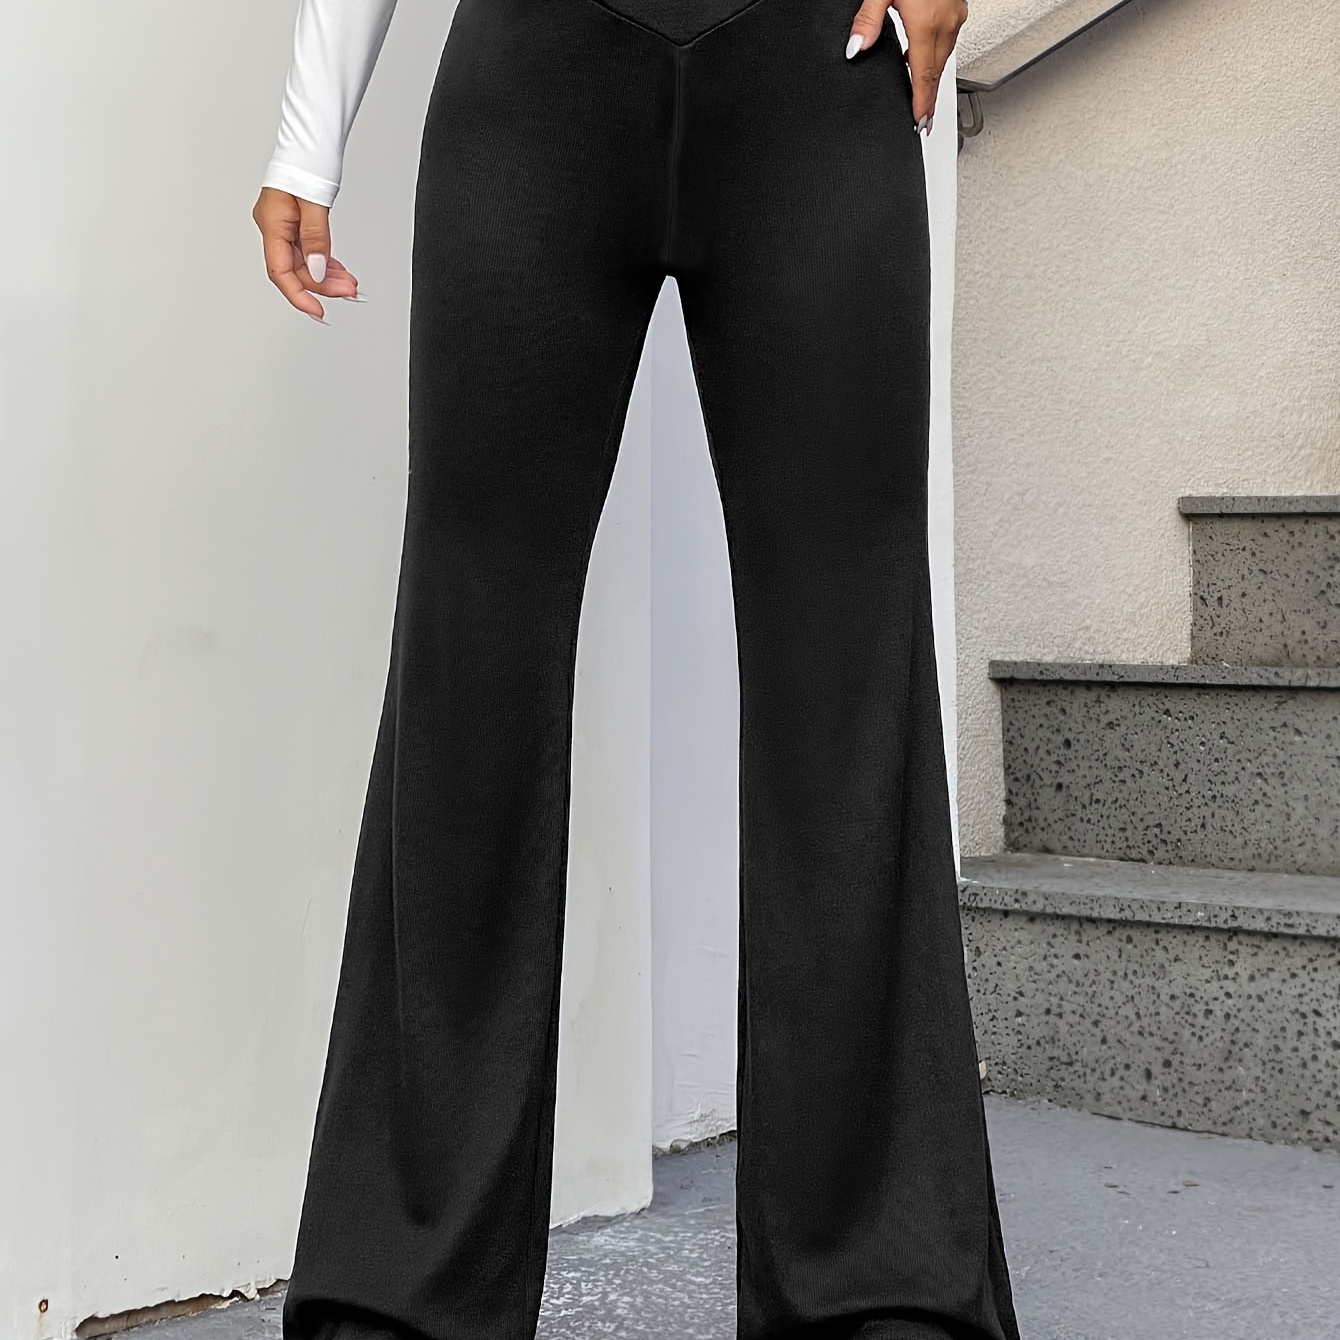 Flare Pants for Women Casual V-Waist Cropped Cross Strap Solid Flared Pants  Trousers Ladies Slimming Pants